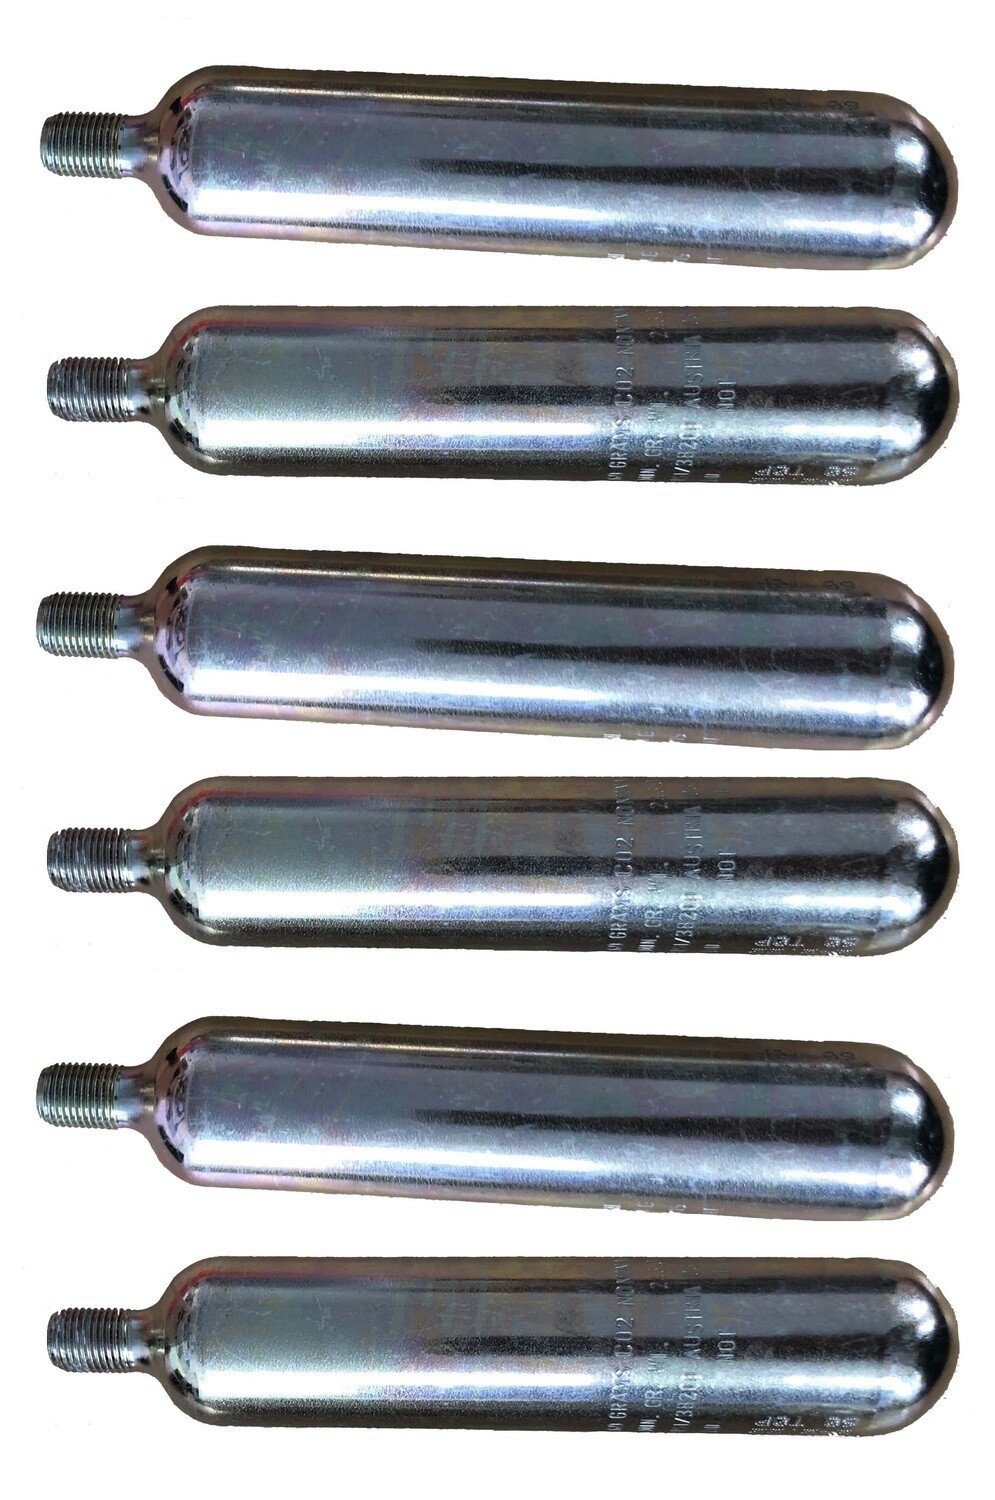 Six (6) CO2 86 gr. cylinders - For USA & CANADA ONLY!